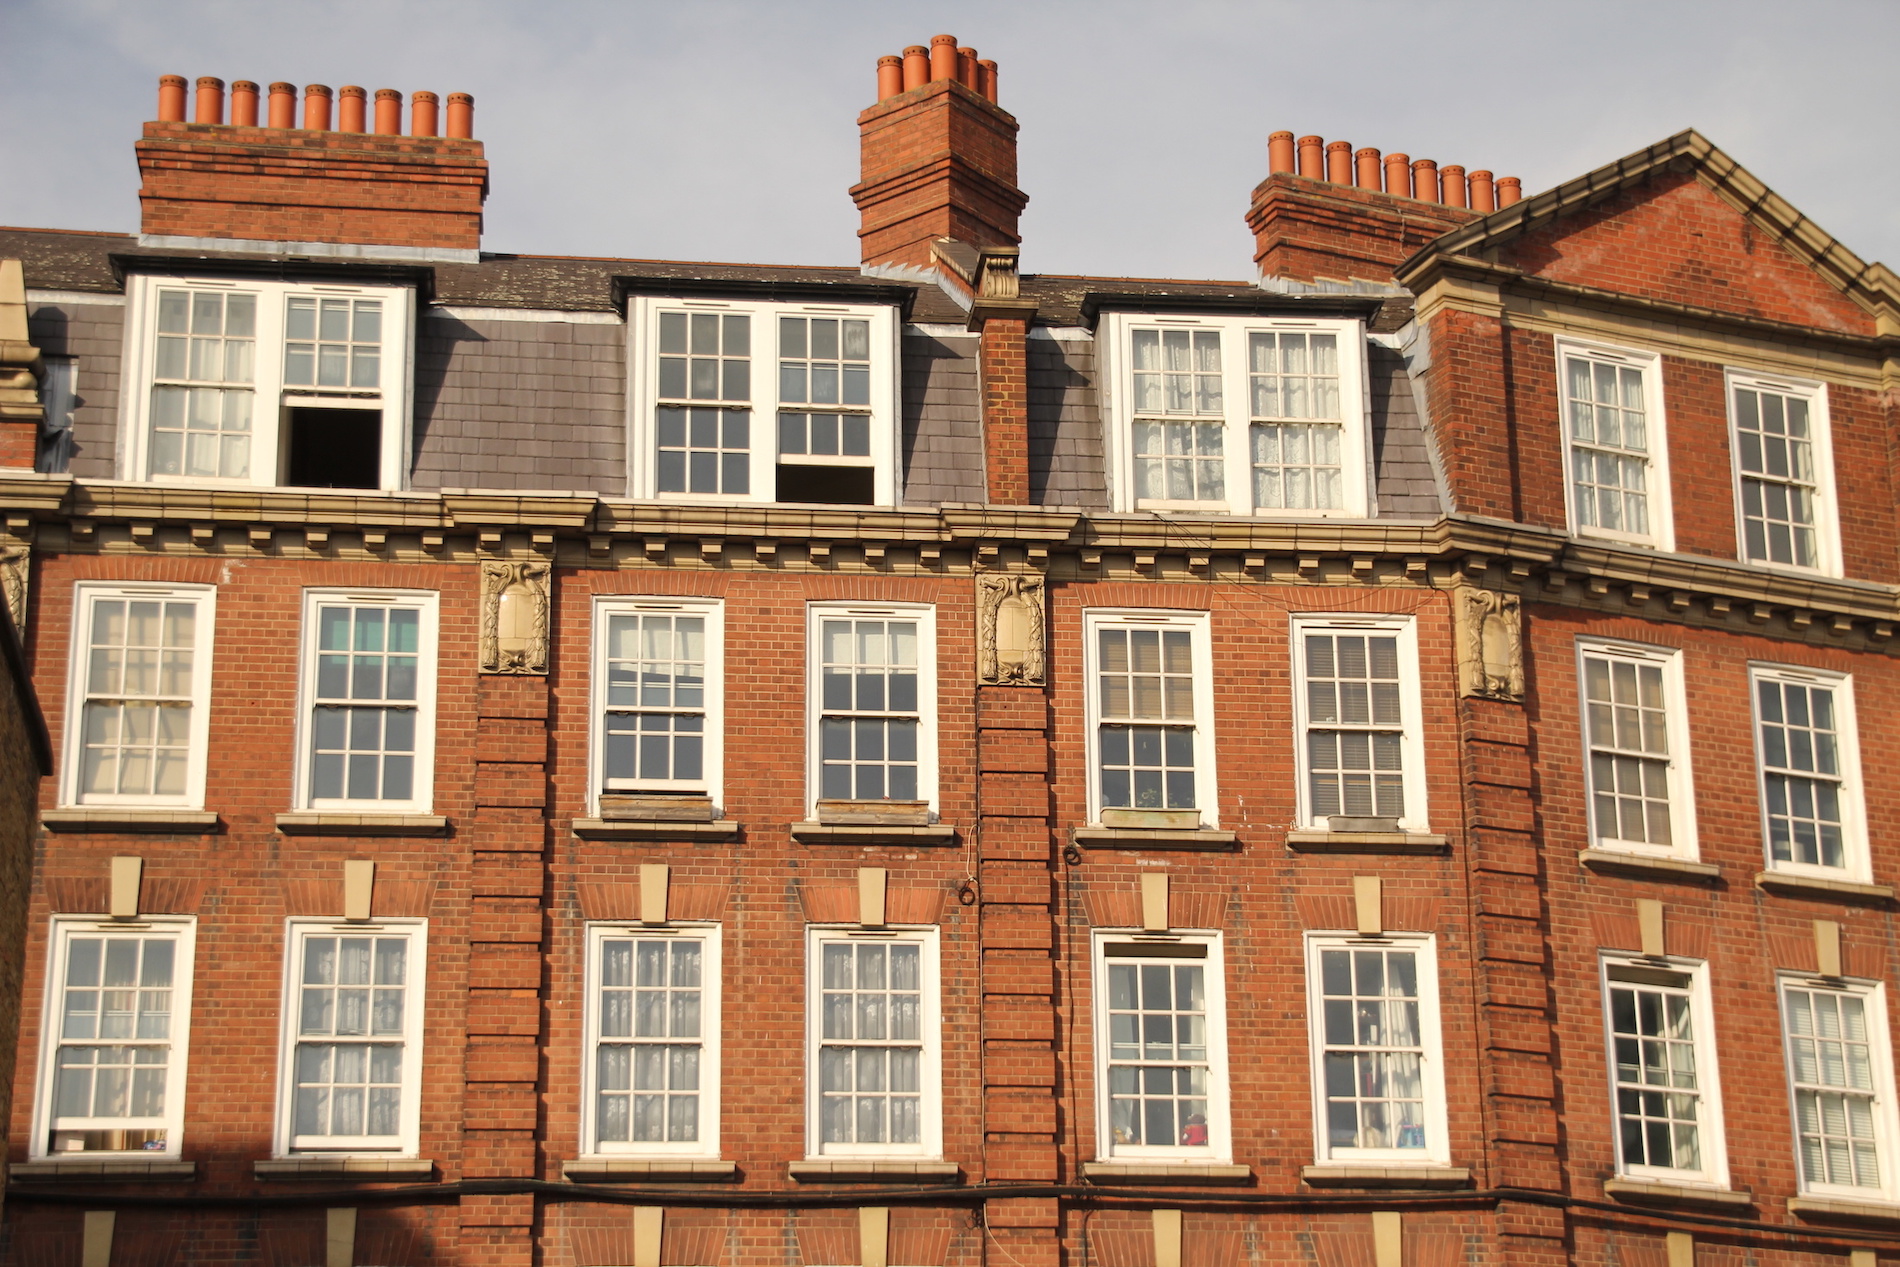 Victorian style apartment block in London